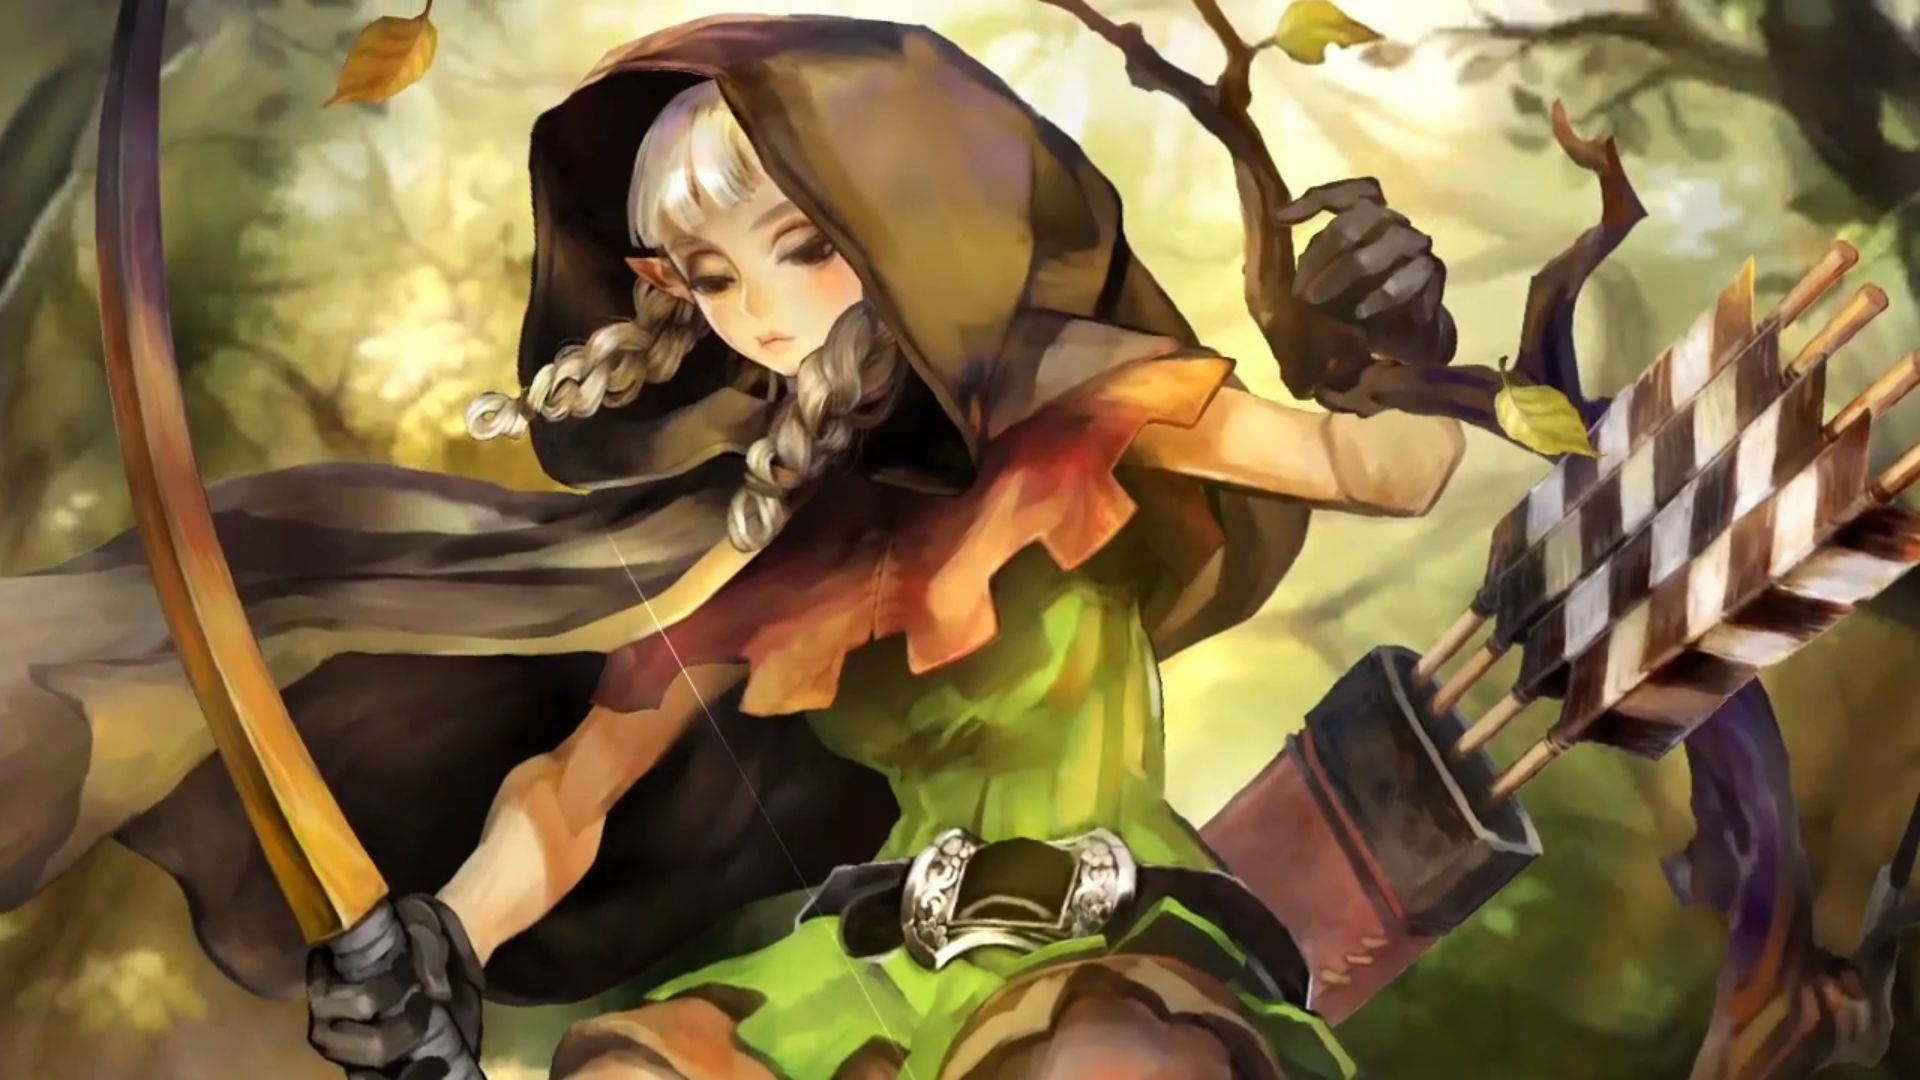 DRAGONS CROWN Anime Action Rpg Fantasy Family Medieval Fighting